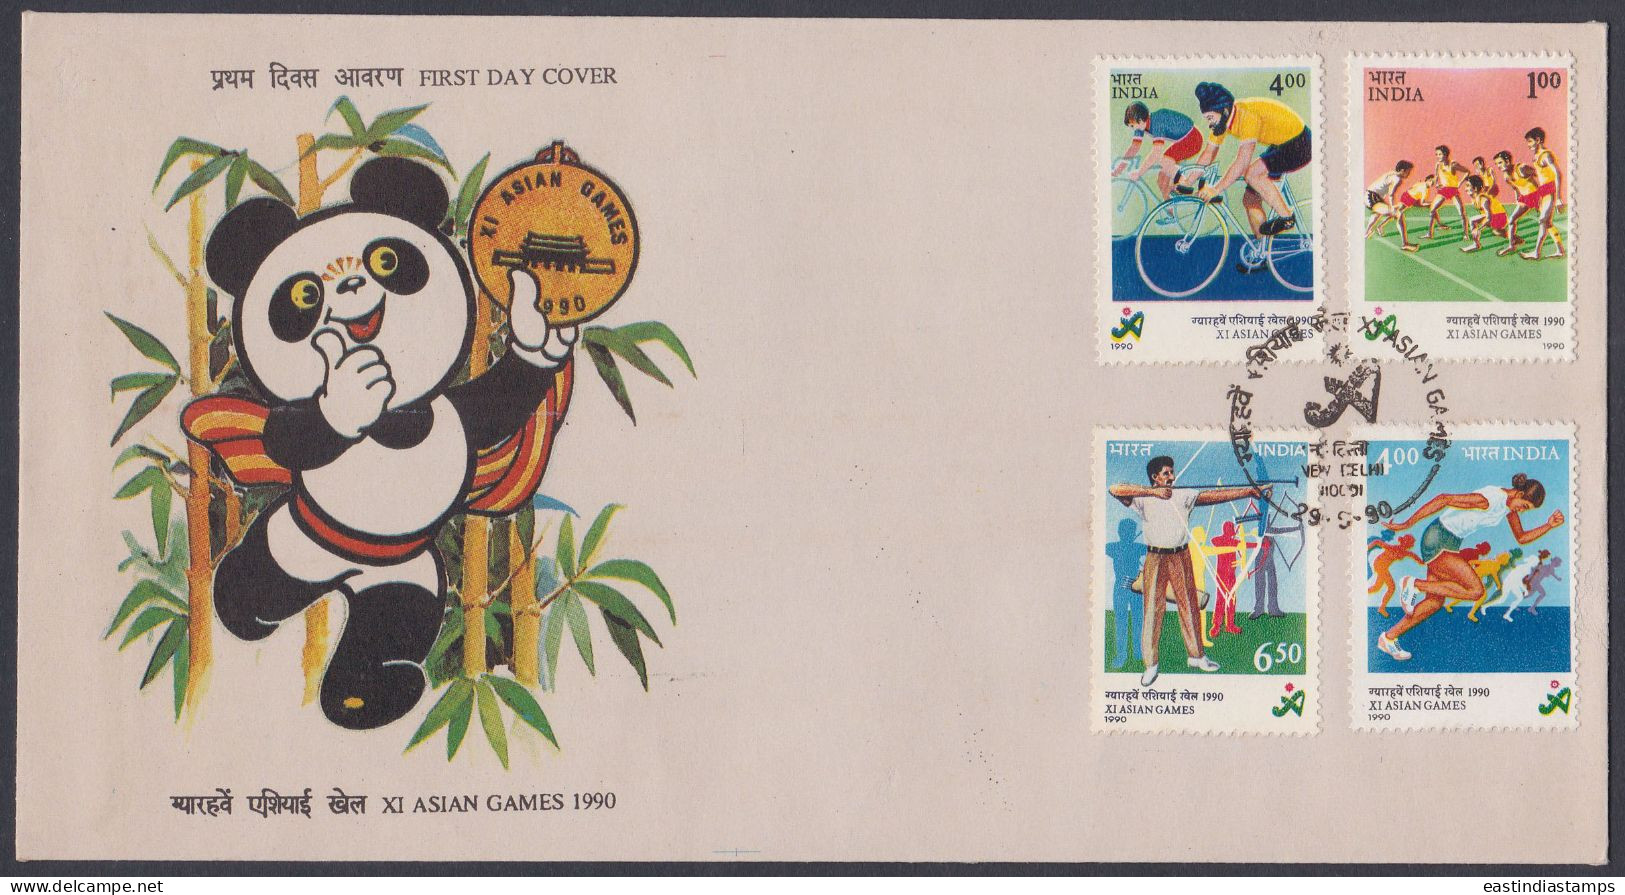 Inde India 1990 FDC Asian Games, Panda, Cycling, Cycle, Archery, Kabaddi, Athletics, Sport, Sports, First Day Cover - Lettres & Documents